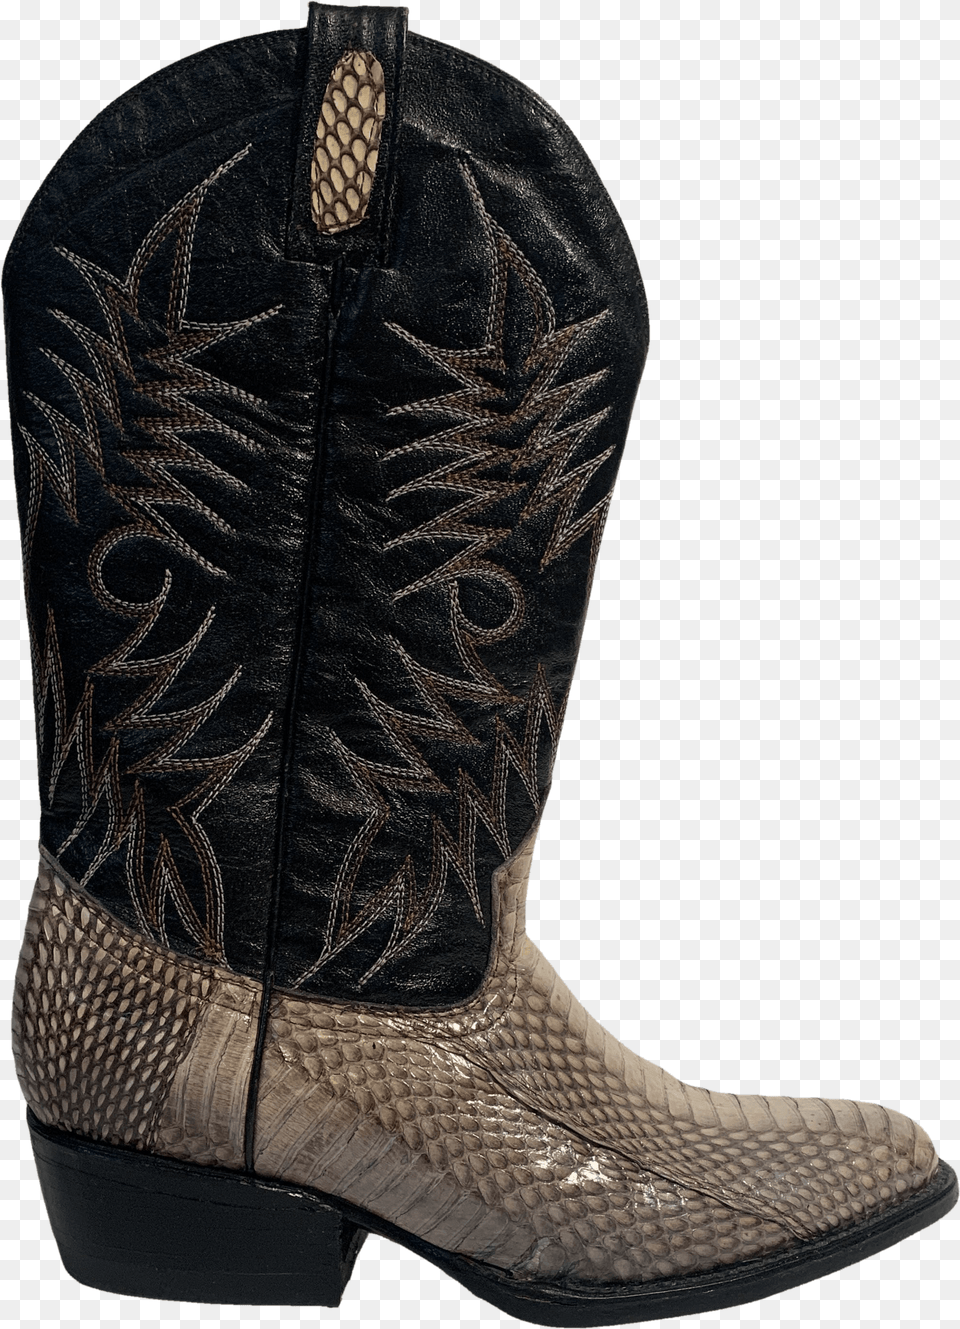 70s Cowboy Boots By Oeste Boots Cowboy Boot Png Image